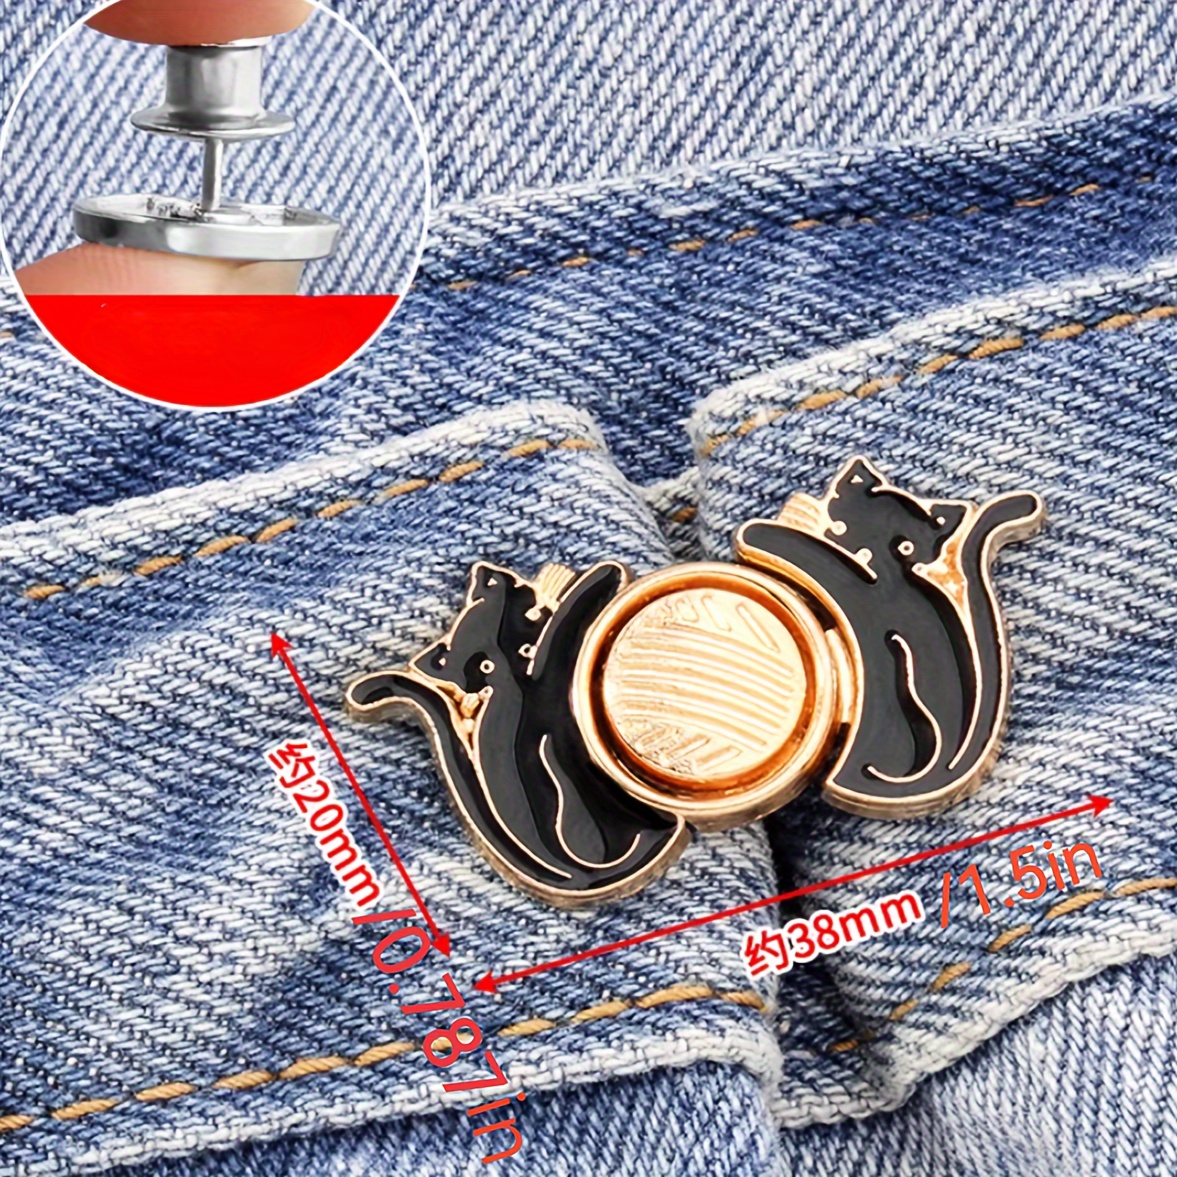 Adjustable Jean Button Pins Button Pins Removable Pants Buttons Buttons for  Jeans No Sew Easy to Use DIY Sewing Require Tools - AliExpress